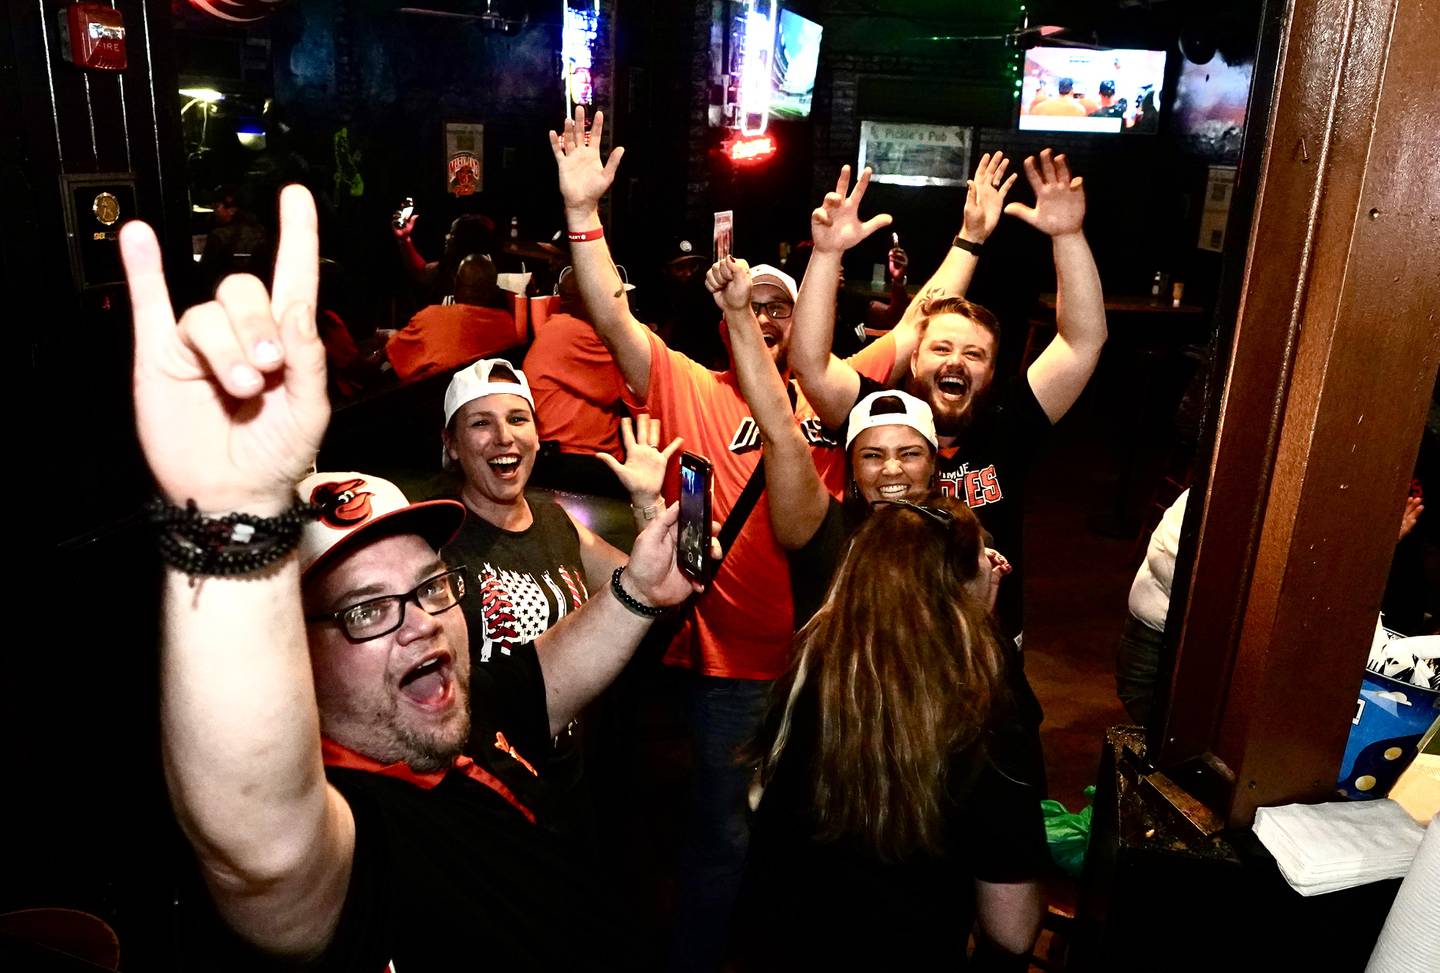 Fans at Pickles Pub Cheer “Let’s go O” as they celebrate the entry to post season play for the first time since 2016.